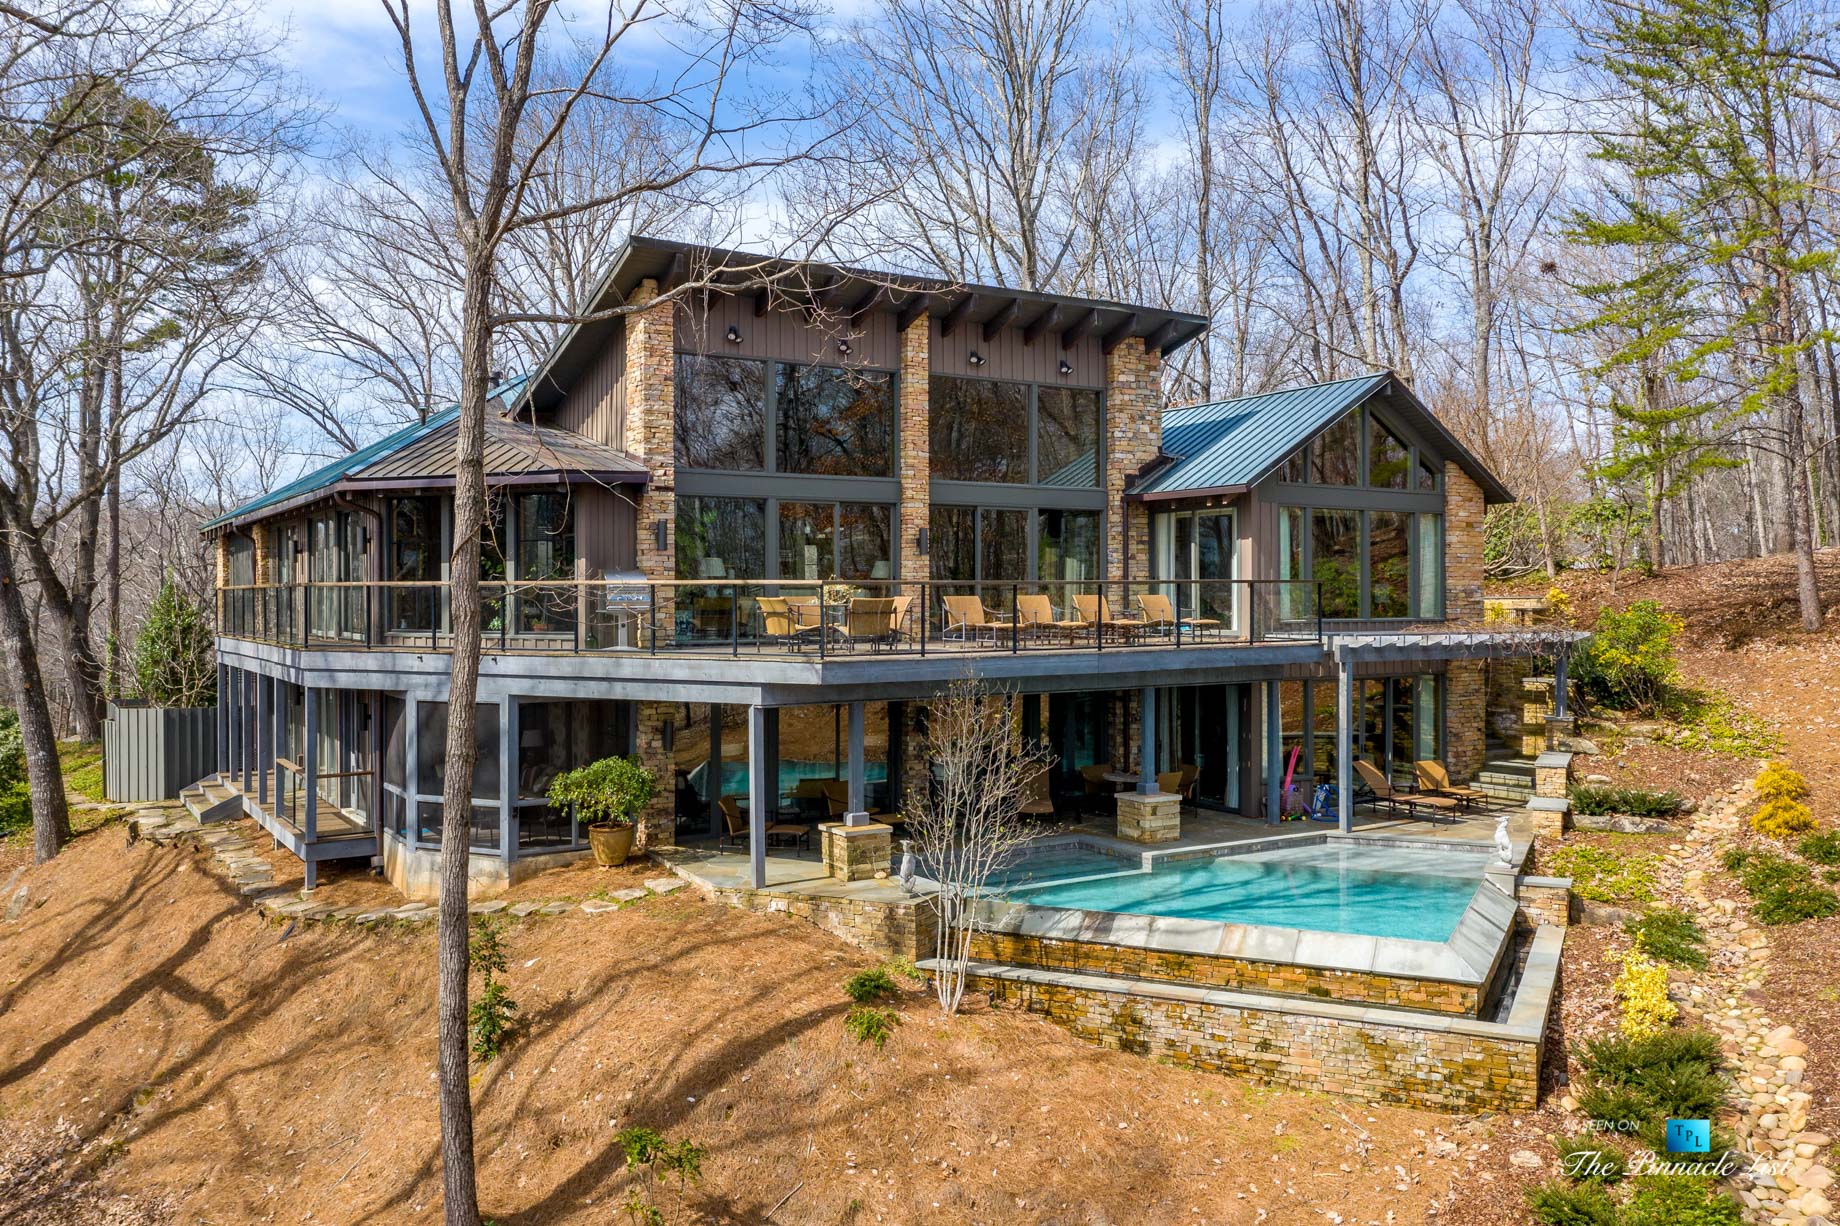 7860 Chestnut Hill Rd, Cumming, GA, USA – Exterior Deck and Pool – Luxury Real Estate – Lake Lanier Mid-Century Modern Stone Home